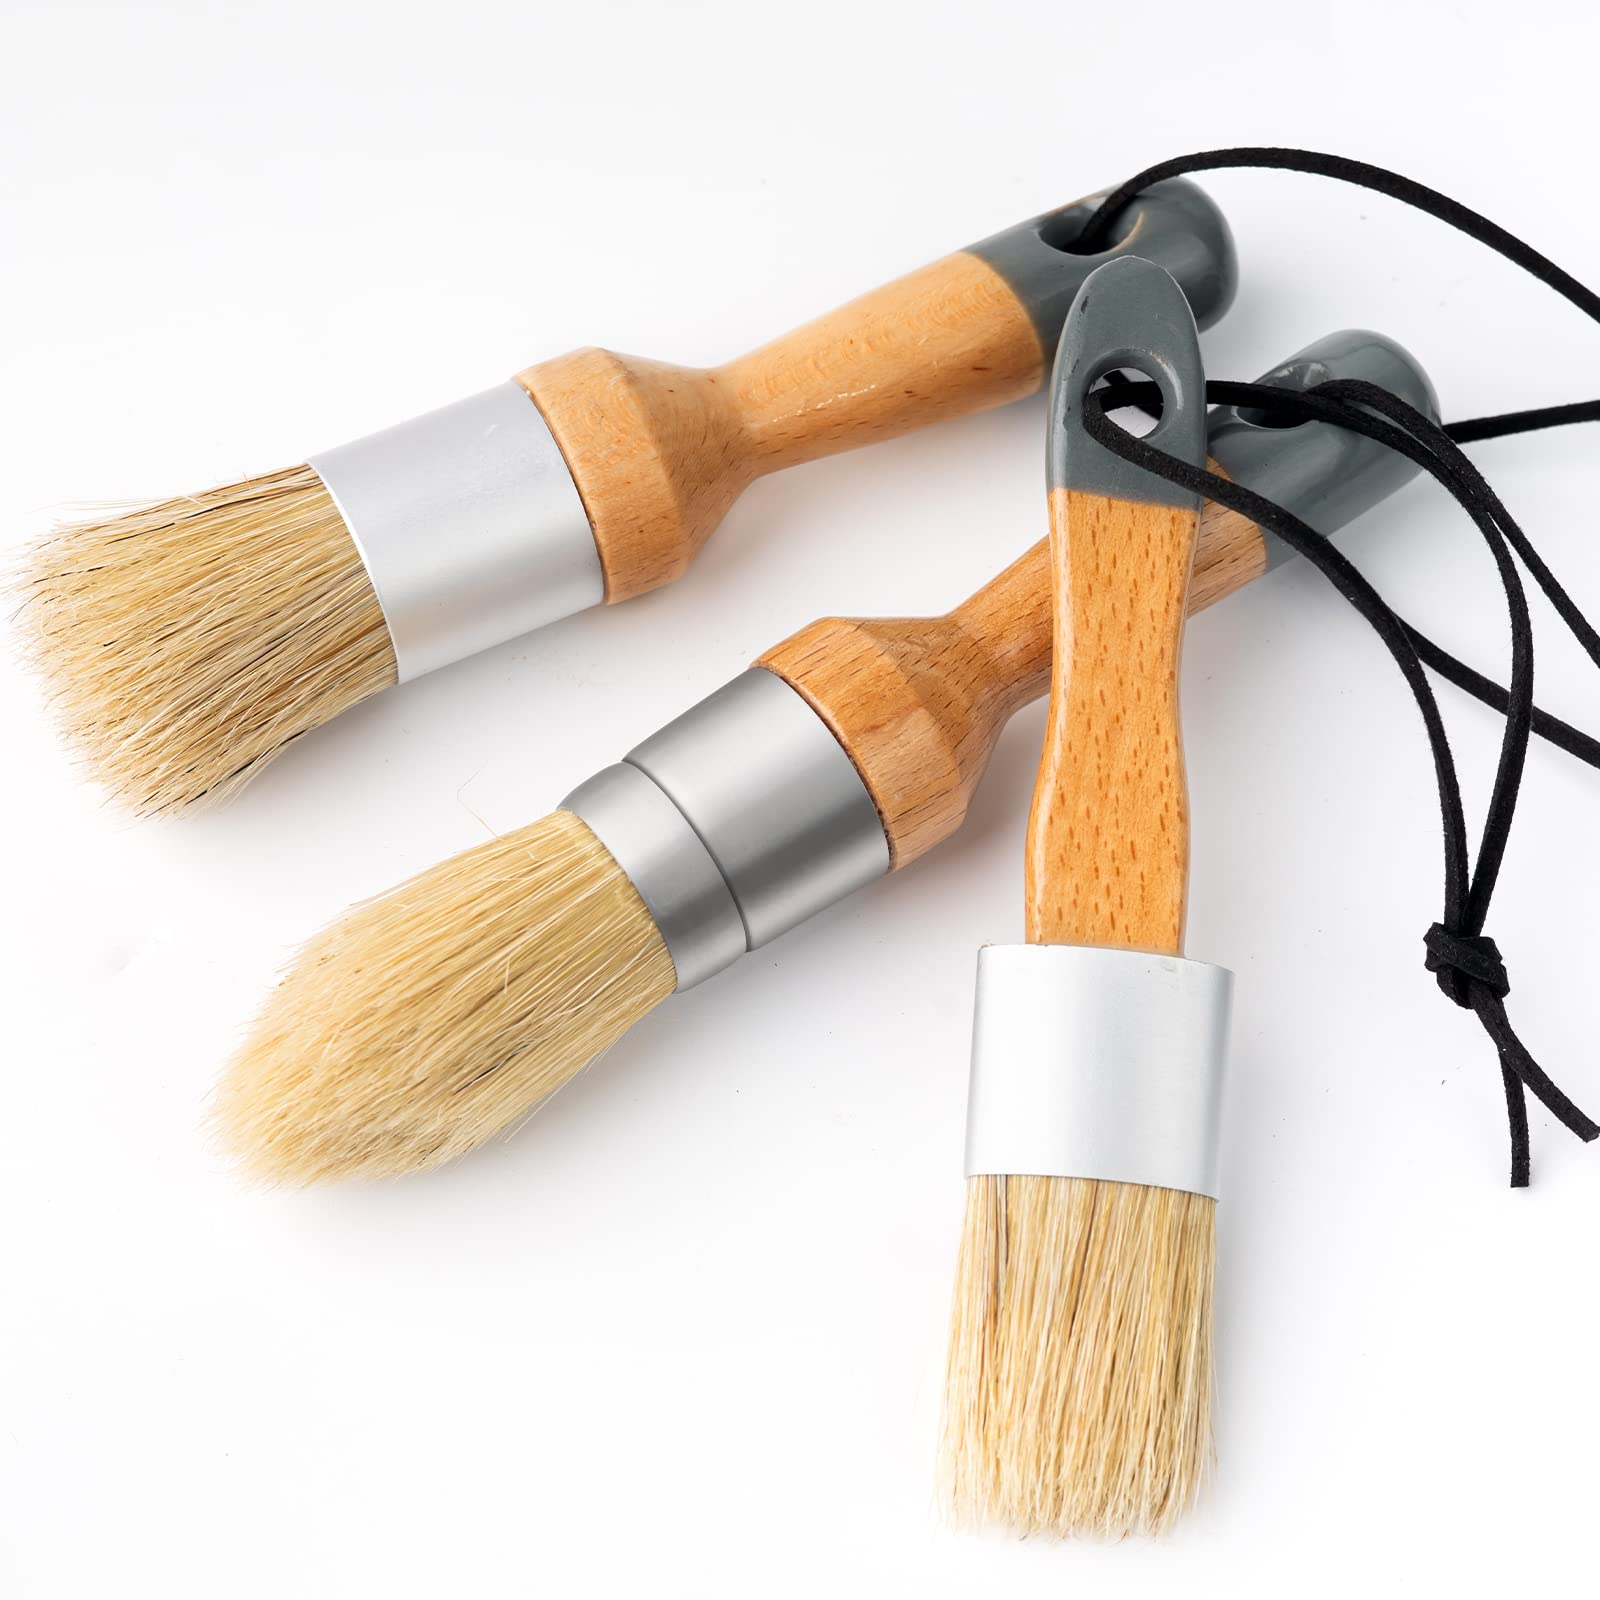 Top 5 Best Paint Brushes for Chalk Paint Review in 2023 - Included Natural  Bristles/Wood Handle 